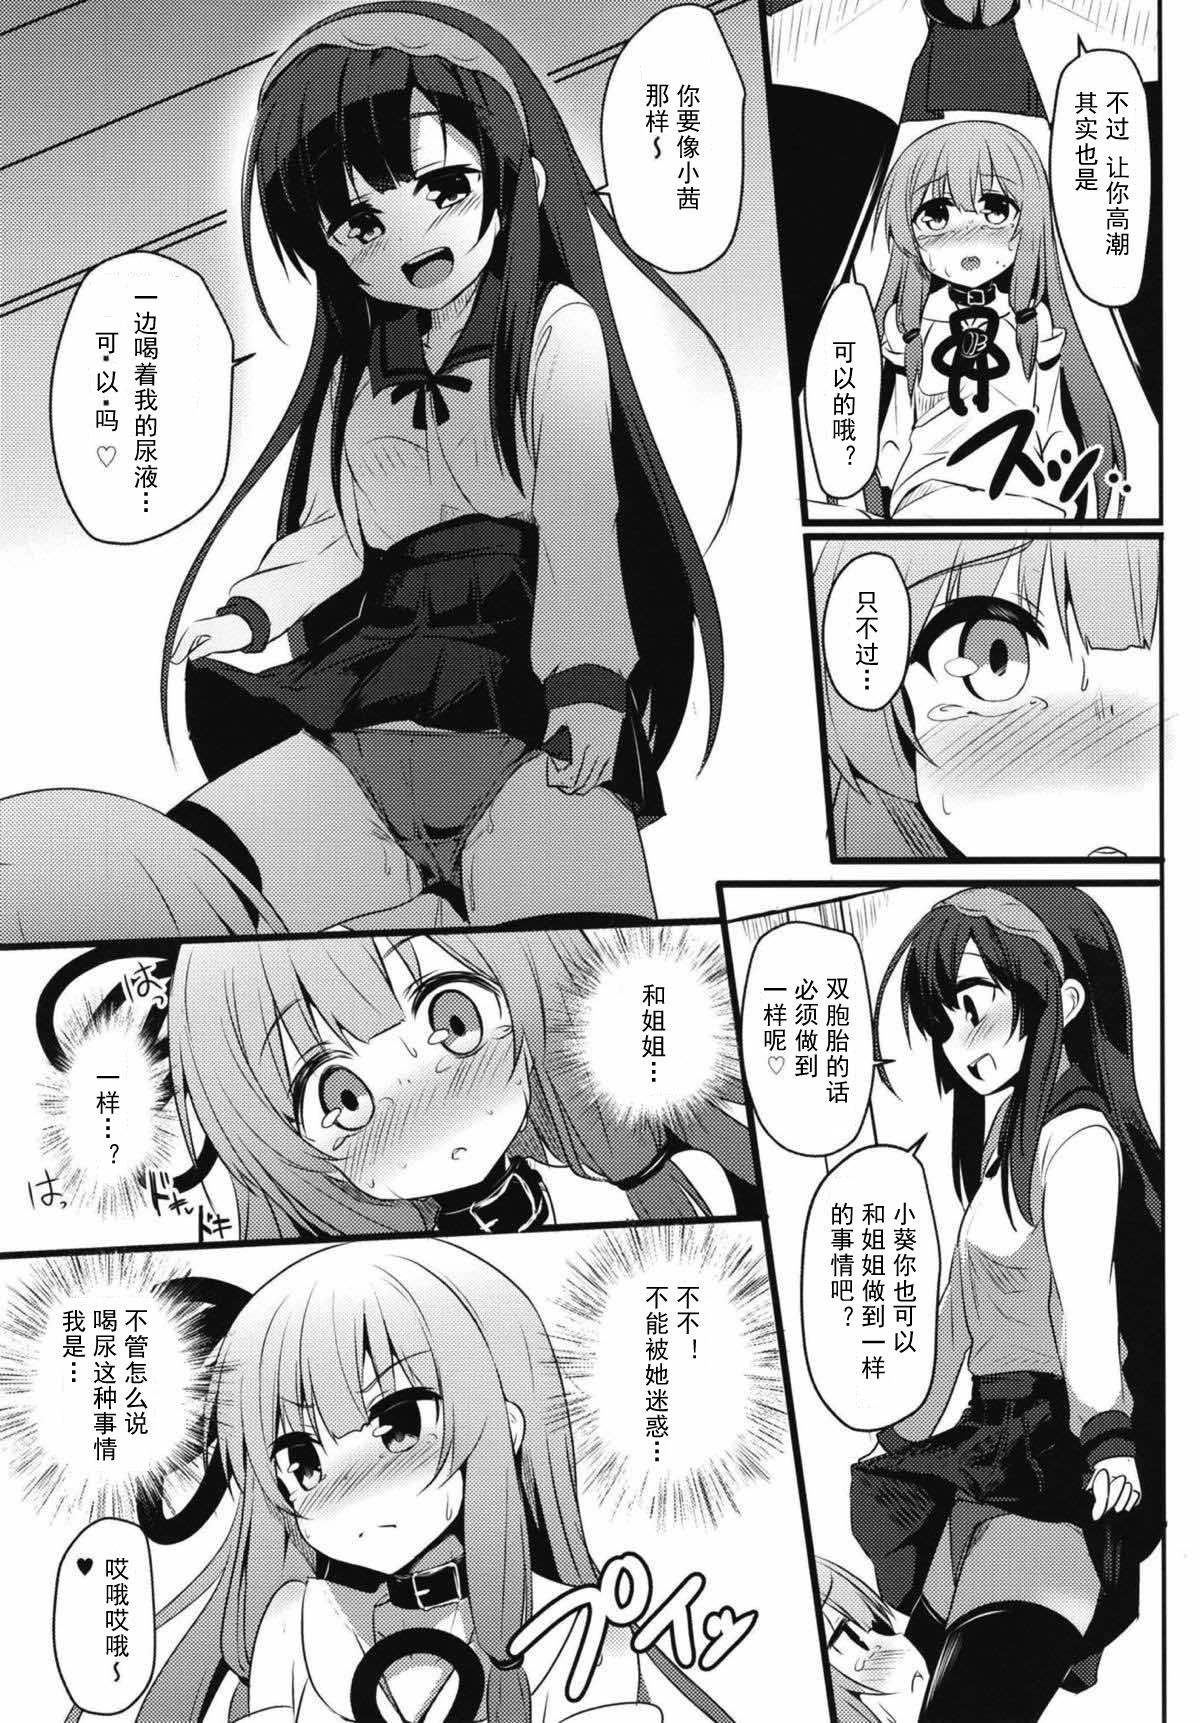 Gapes Gaping Asshole (Kotonoha's Festa 2) [Milk Pudding (Jamcy)] Akane-chan Challenge! 2.5-kaime (VOICEROID) [Chinese] [古早个人汉化] - Voiceroid Dad - Page 11